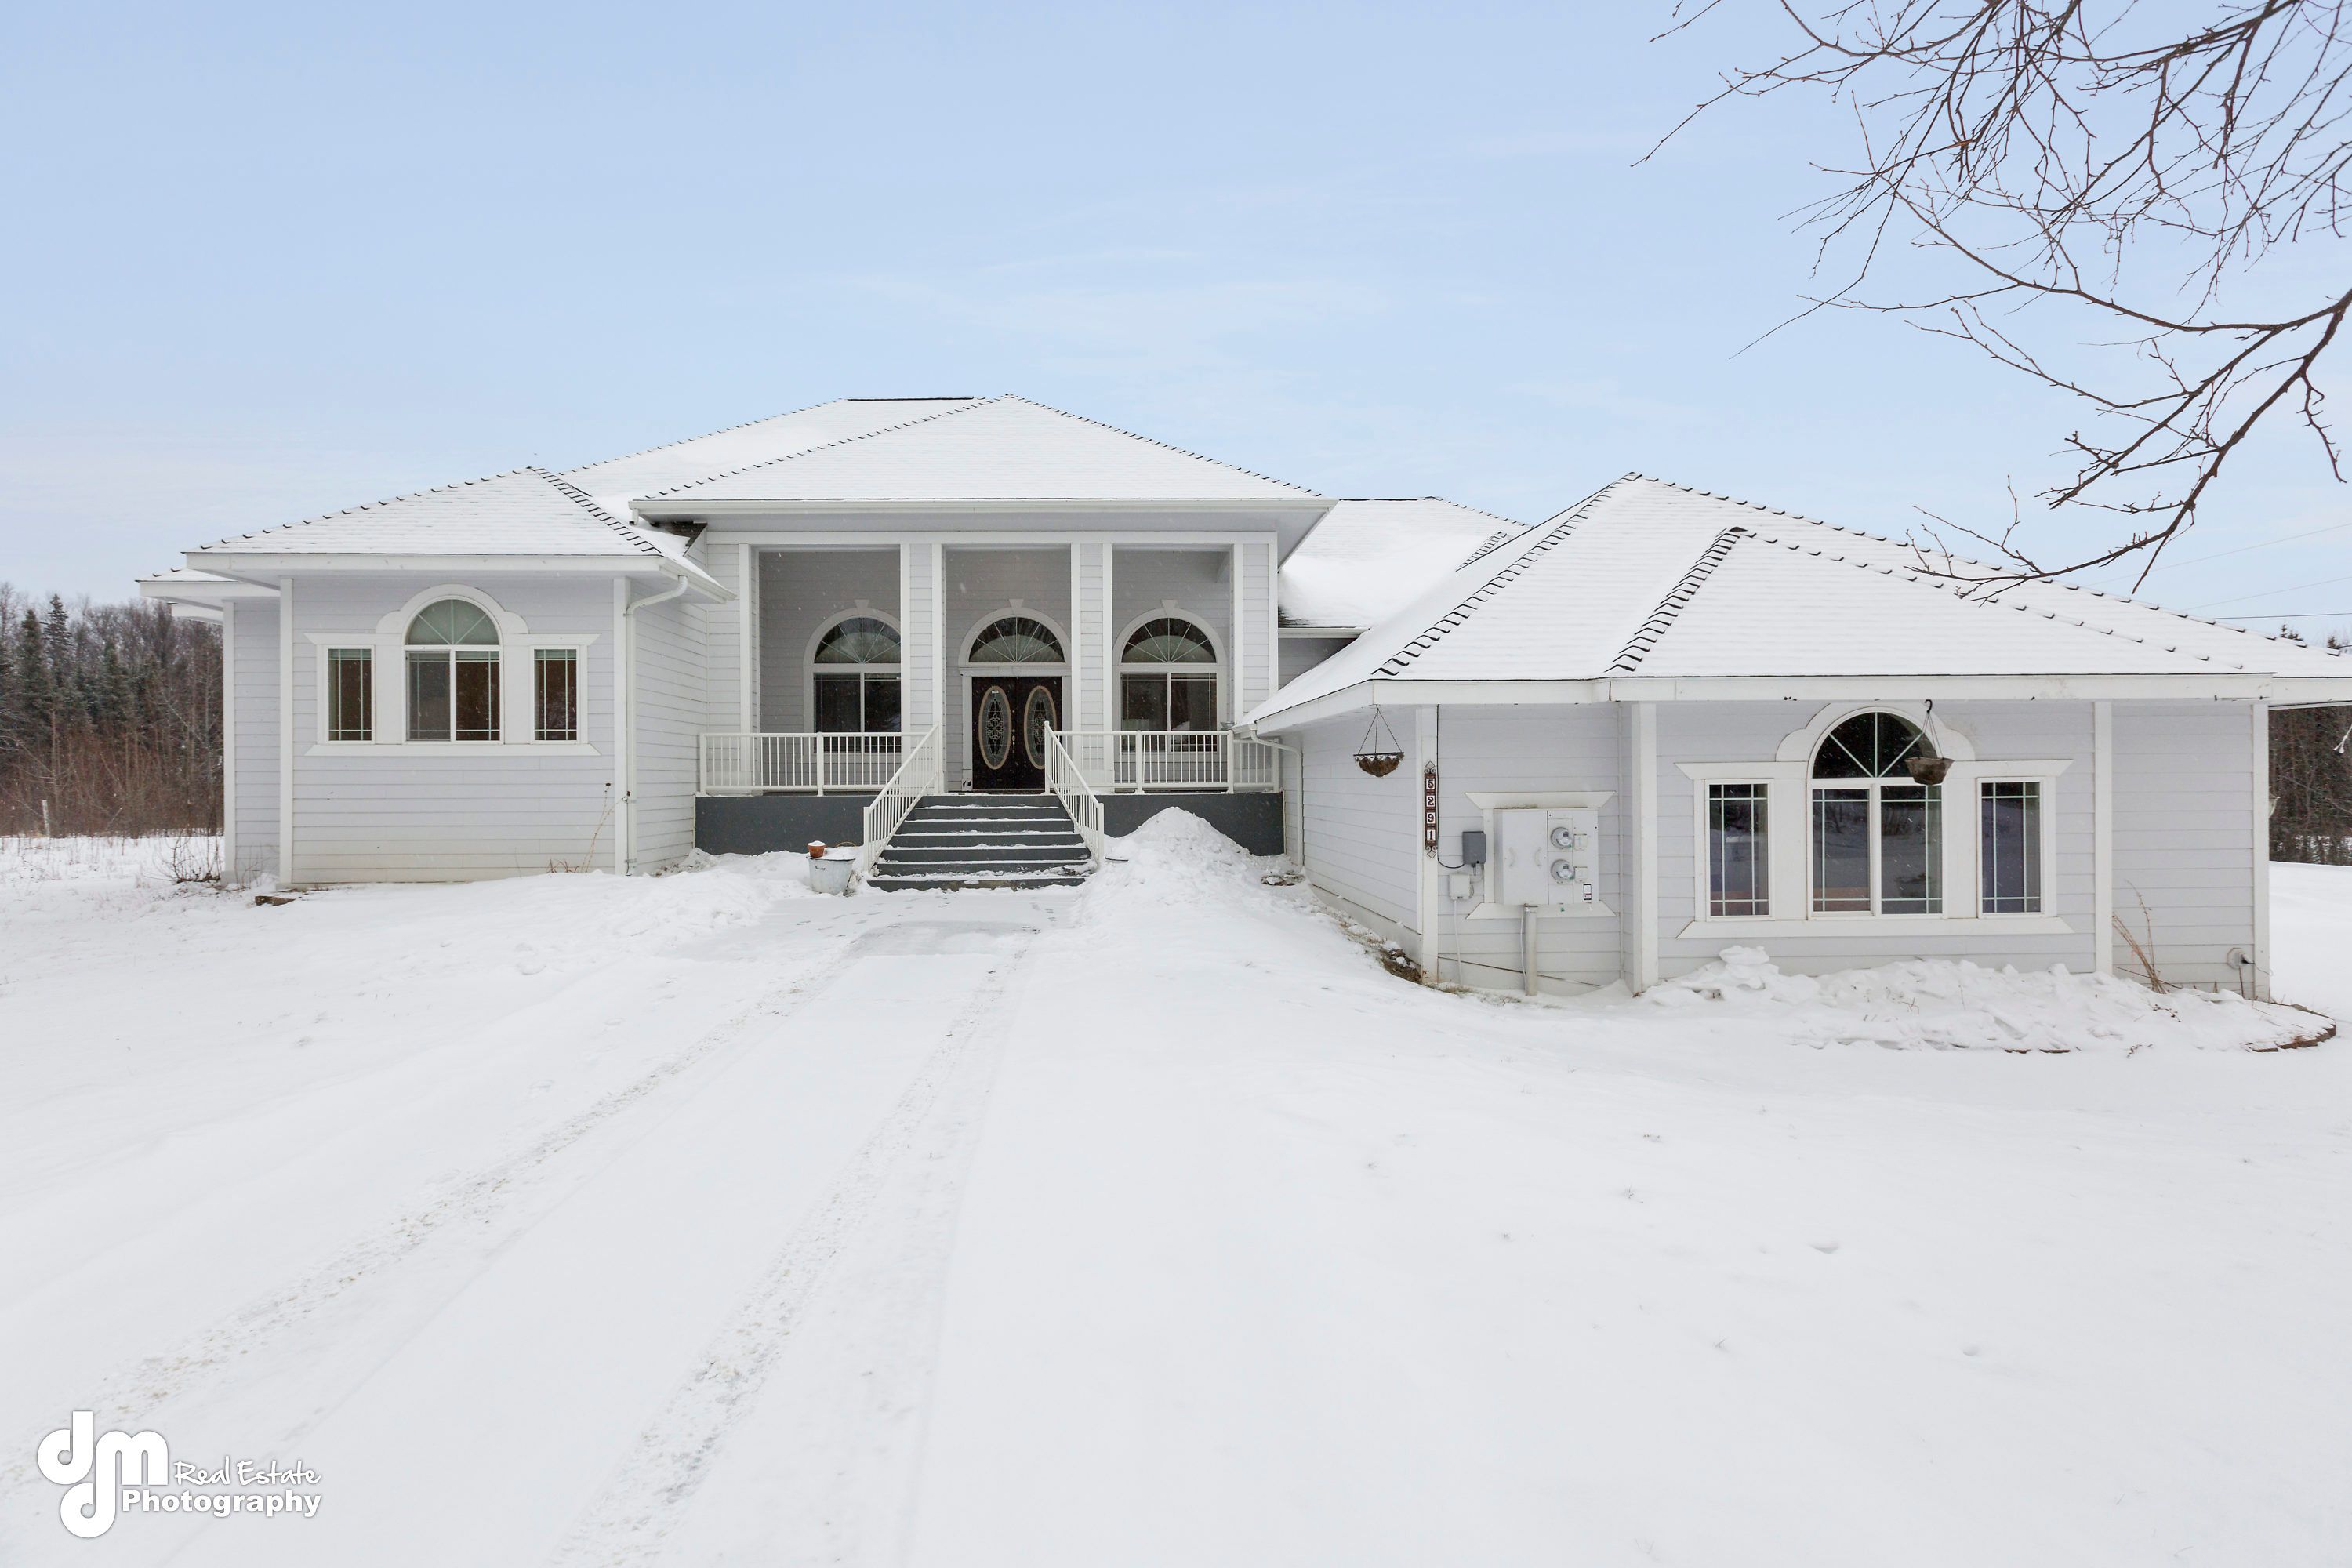 Arctic Rose Assisted Living Home exterior in winter, surrounded by snow-covered nature.